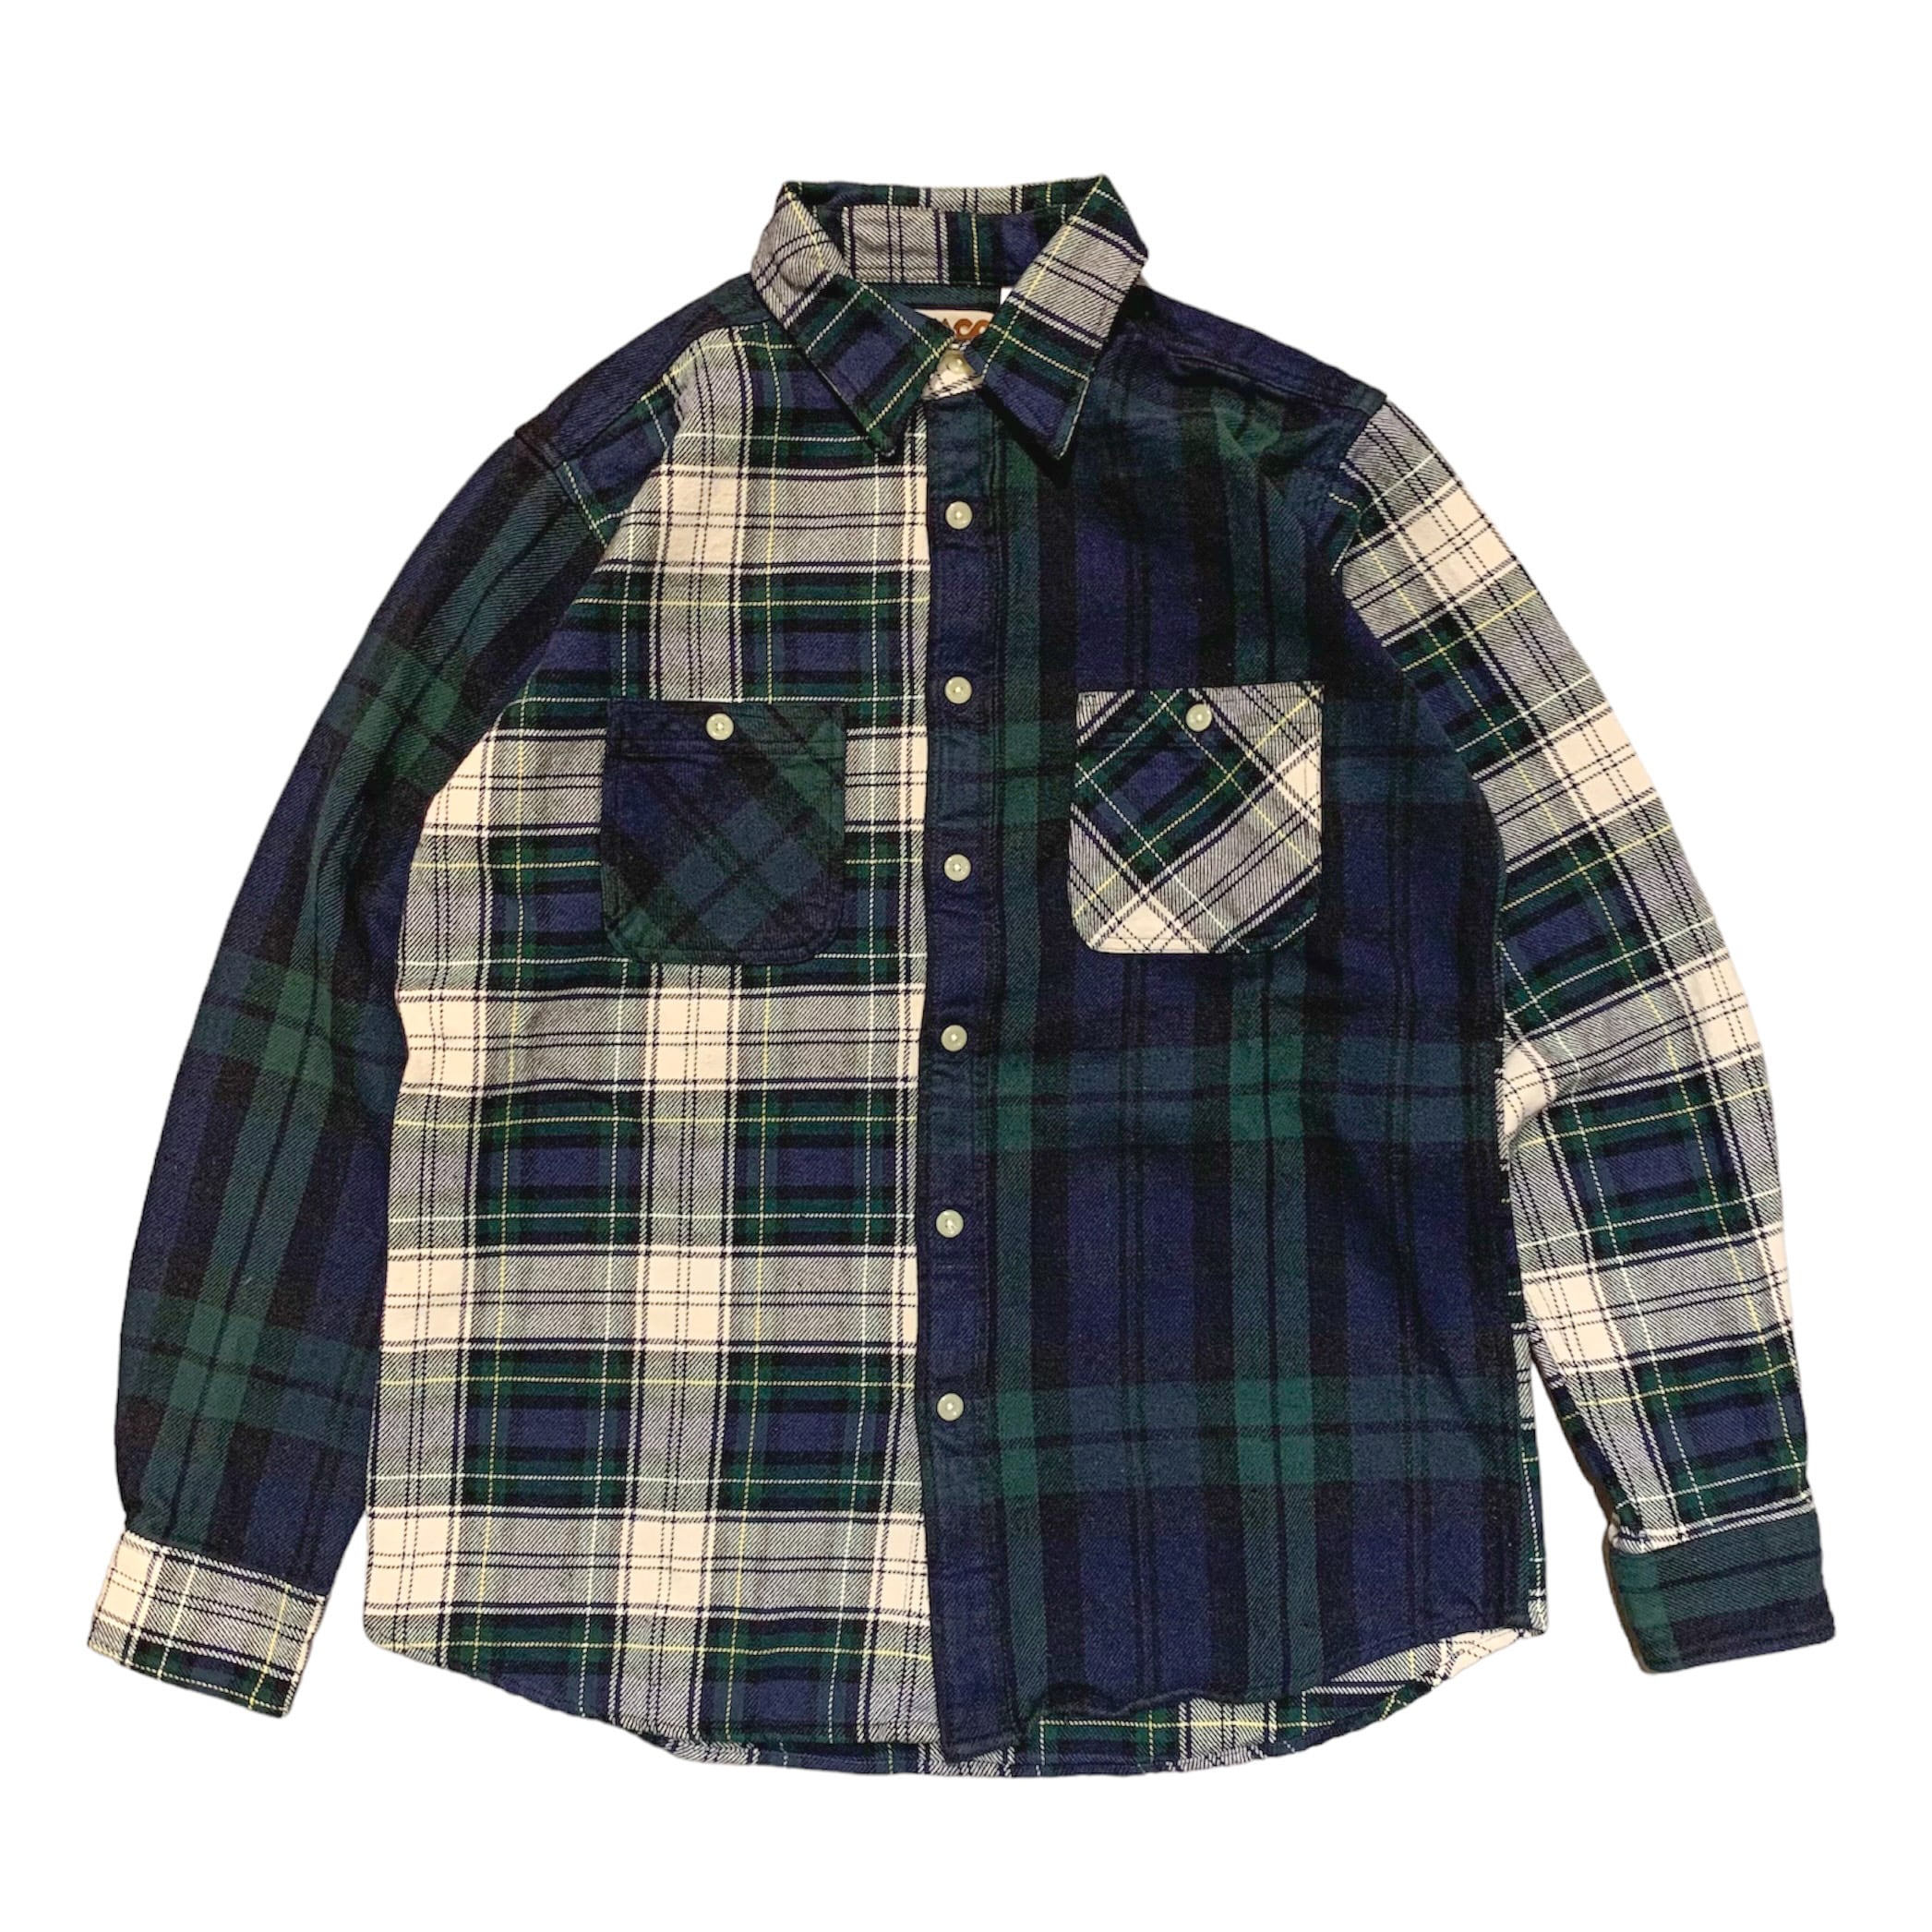 CAMCO / Double Face Heavy Flannel Patchwork Shirt / JR tlVc pb`[N